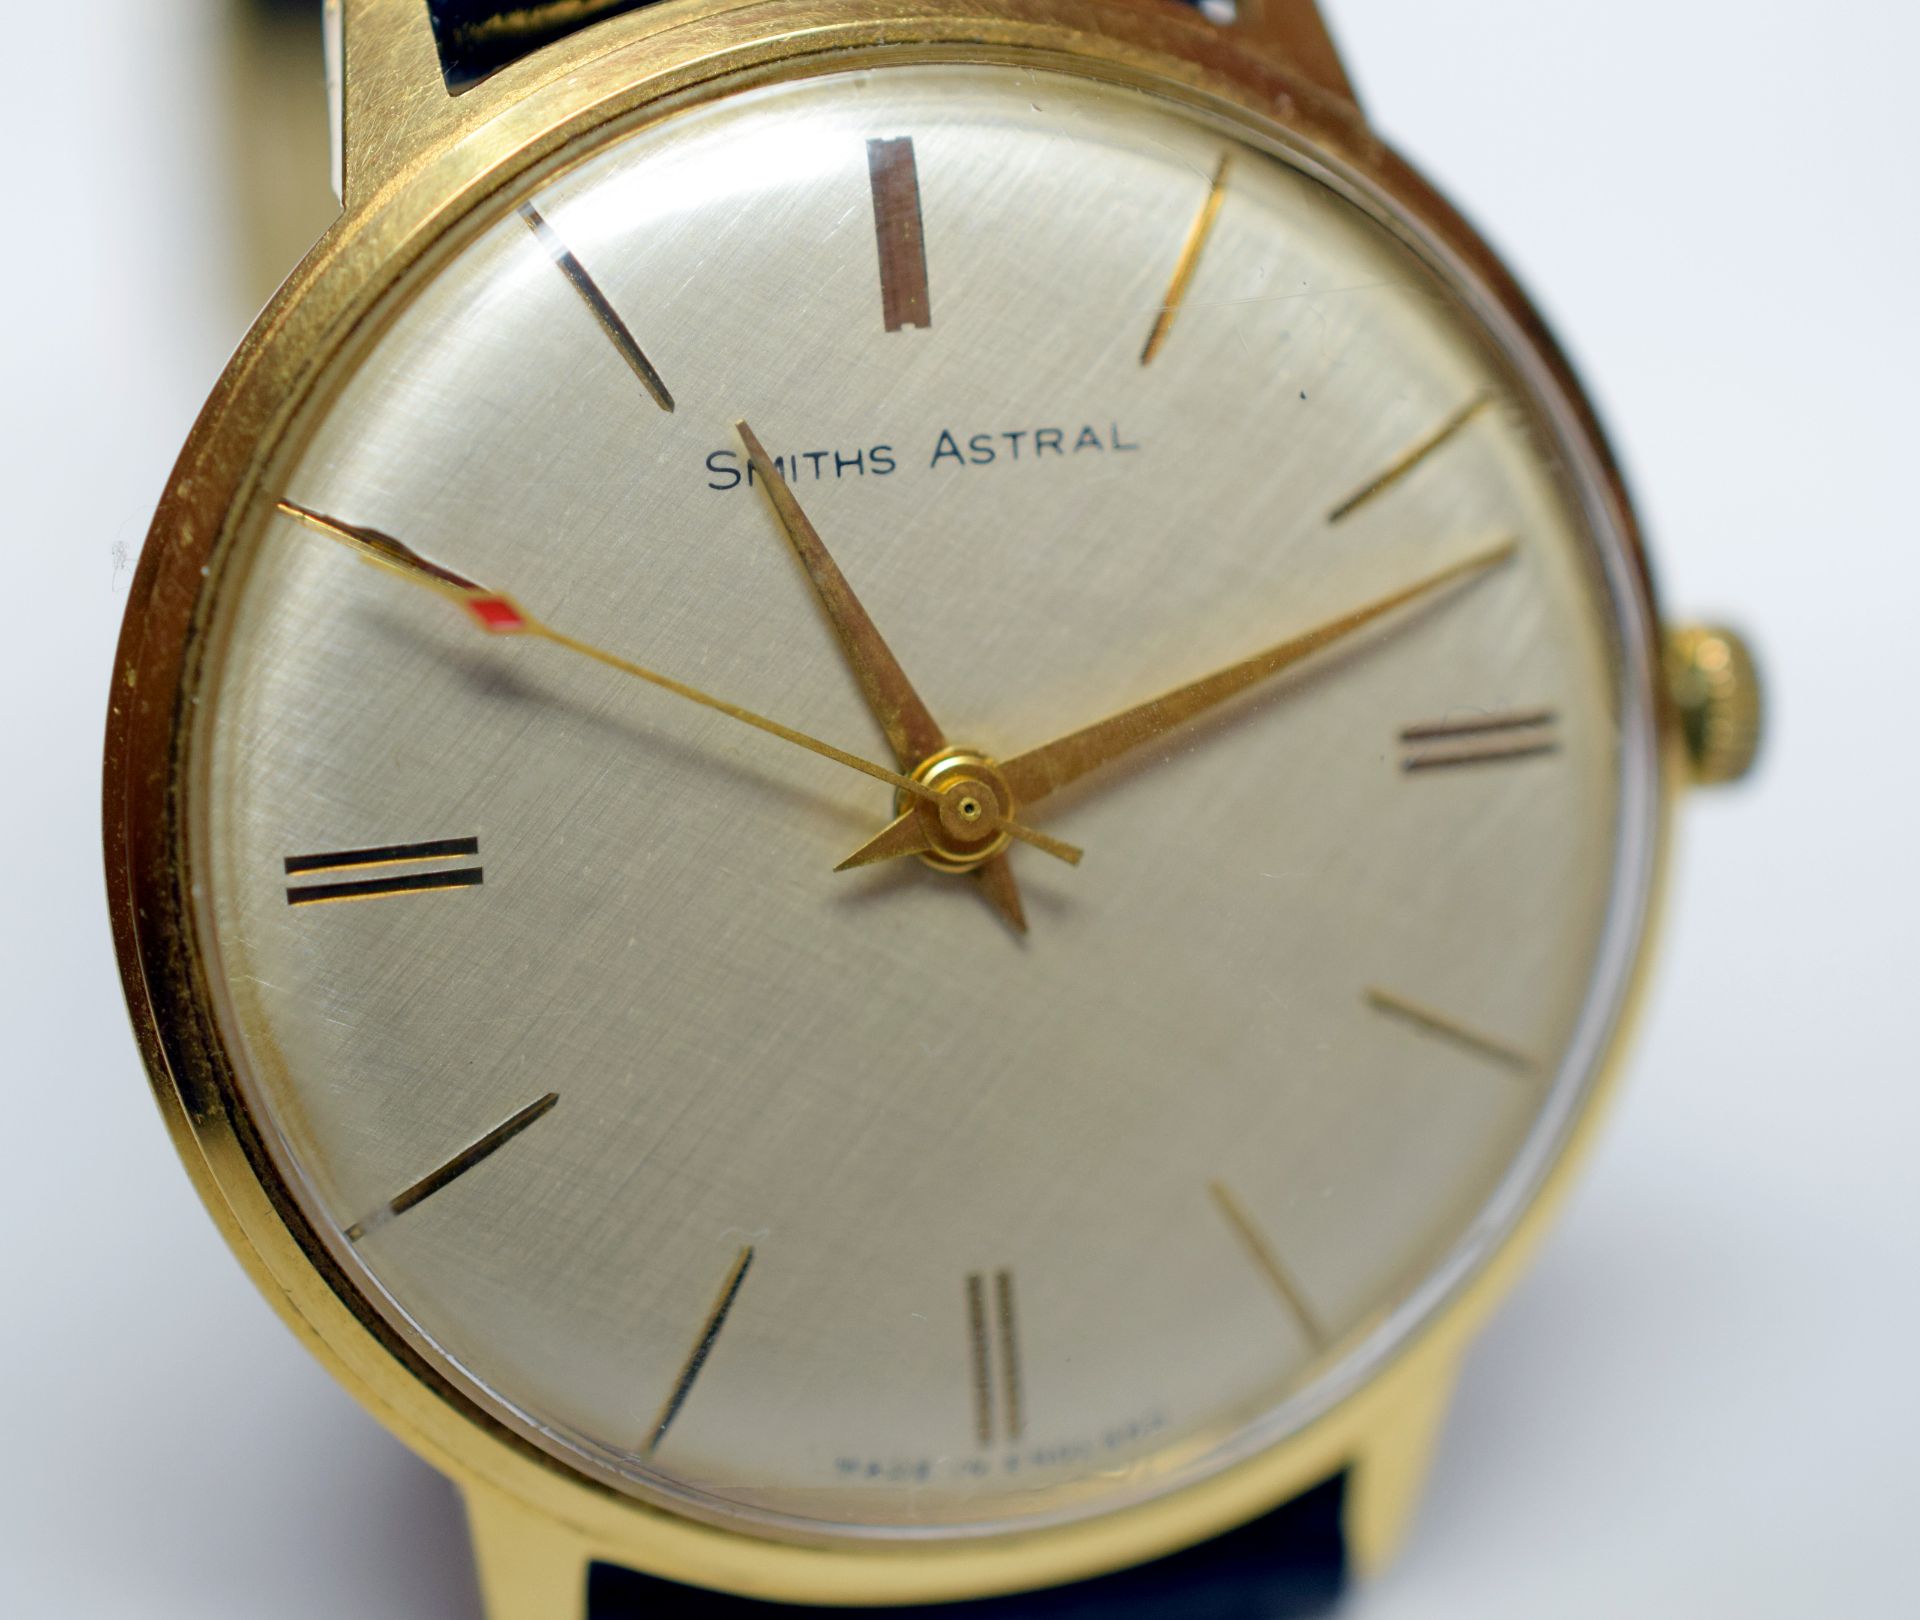 Smiths Astral Gentleman's Wristwatch - Image 5 of 5